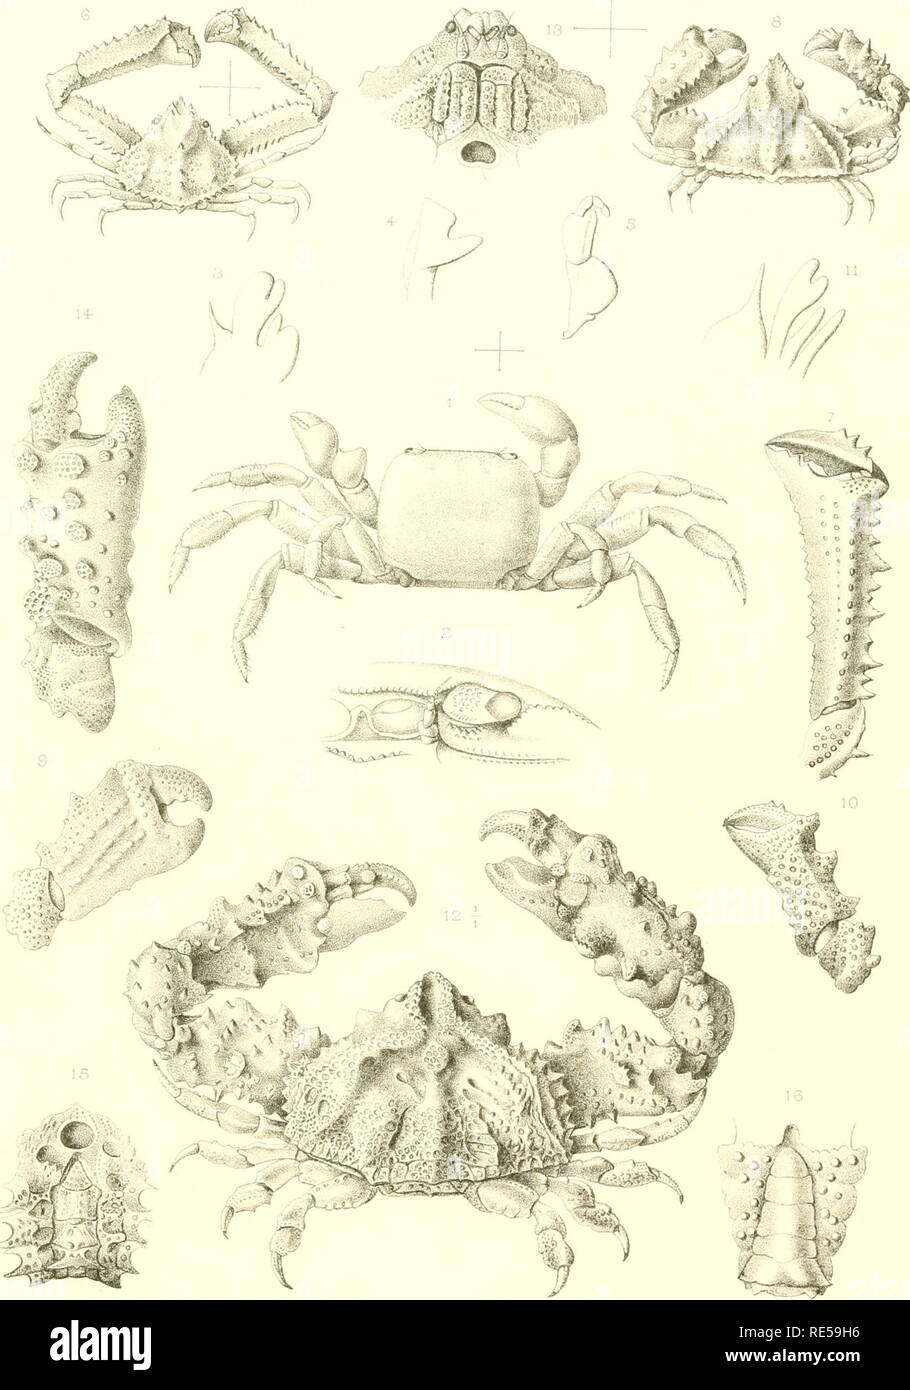 . Crustacés Décapodes. Ptie. 1: Brachyures et Anomoures. Hermit crabs; Crabs. Exprd.rhi Ti-av^iilK-iir cl ,lii Tali.sm.i Cruslaccs décapodes. T. 1-'PI. XVIII. Jî L Boix-ier etiiuet, ad.naf. de] Irnp Leniercier, Paris Nicolet.lith Cjclograp.sus occidentalis (hS) Lambrus Miersi ( 6-7)   Parthenolambrus expansus f8-ll) —Parihenope Bouvien (12-15 ). HeterocrypLa Maltzani, va/' ManonisdG) MdsaonAC^Eiîiteurs. Please note that these images are extracted from scanned page images that may have been digitally enhanced for readability - coloration and appearance of these illustrations may not perfectly r Stock Photo